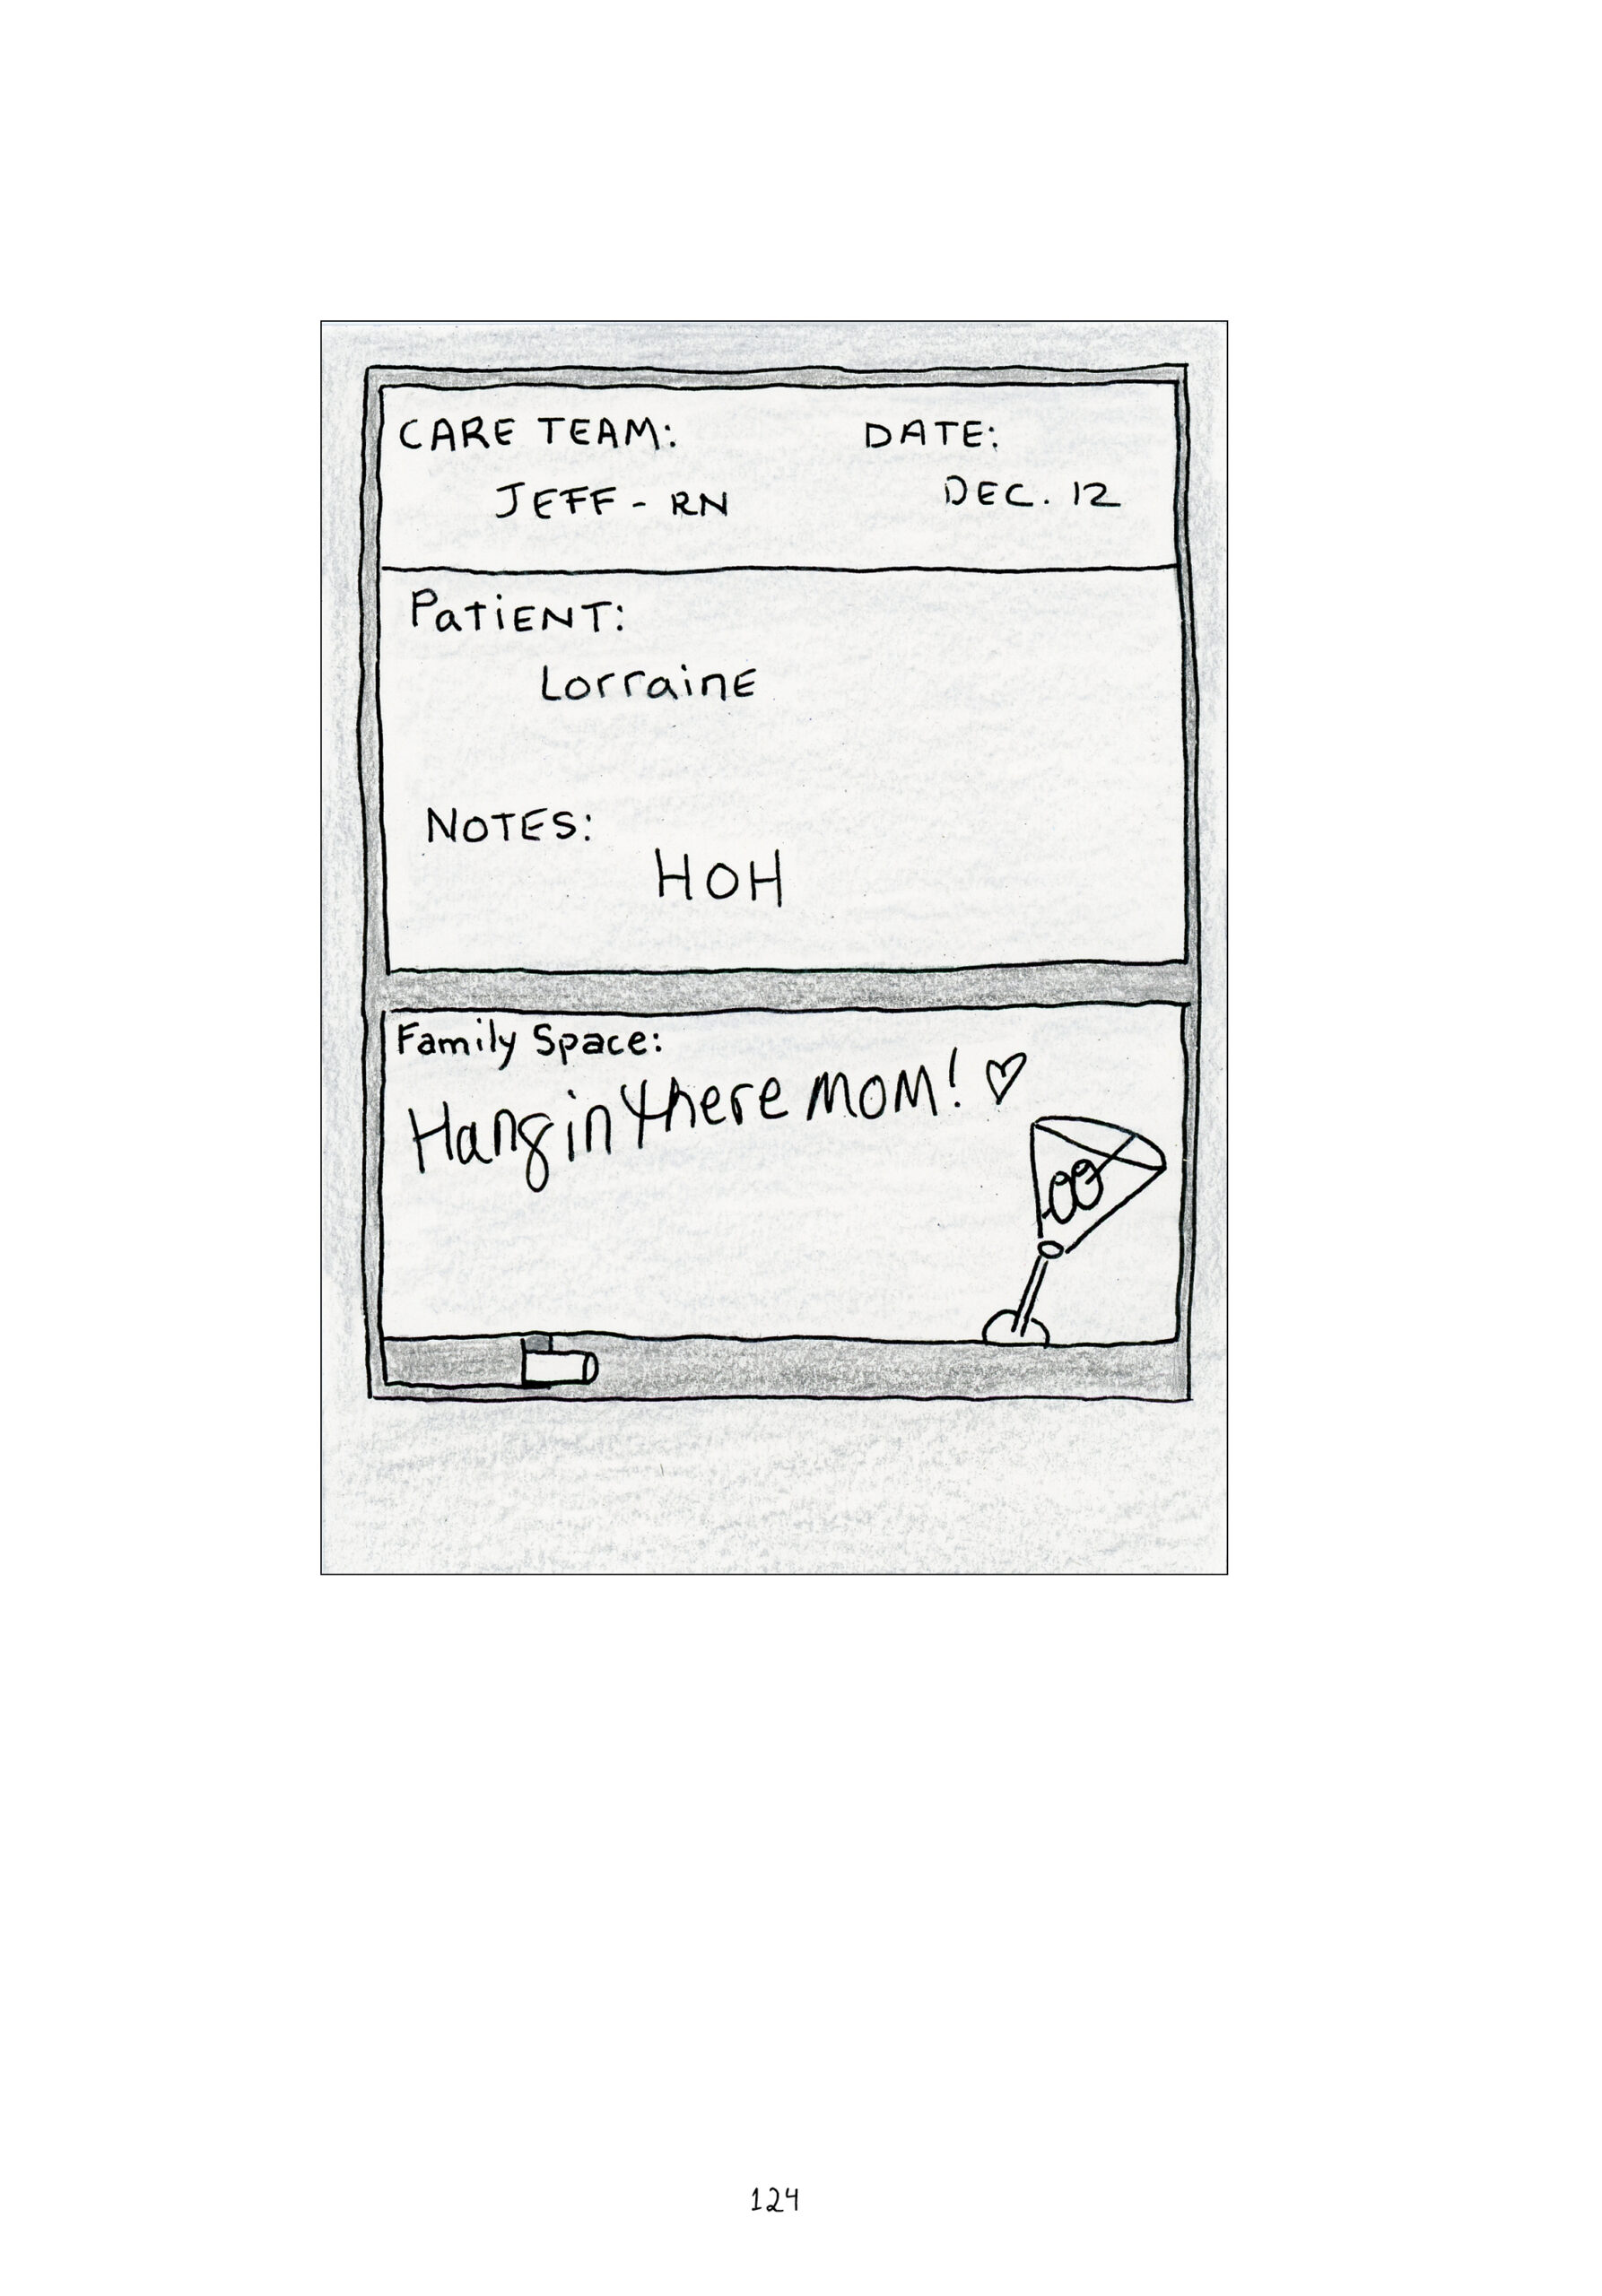 One panel of a white board that does not take up the full page; the rest is a white background. The board reads, â€œCare team: Jeff - RN. Date: Dec 12. Patient: Lorraine. Notes: HOH. Family space: Hang in there, Mom! (heart)â€